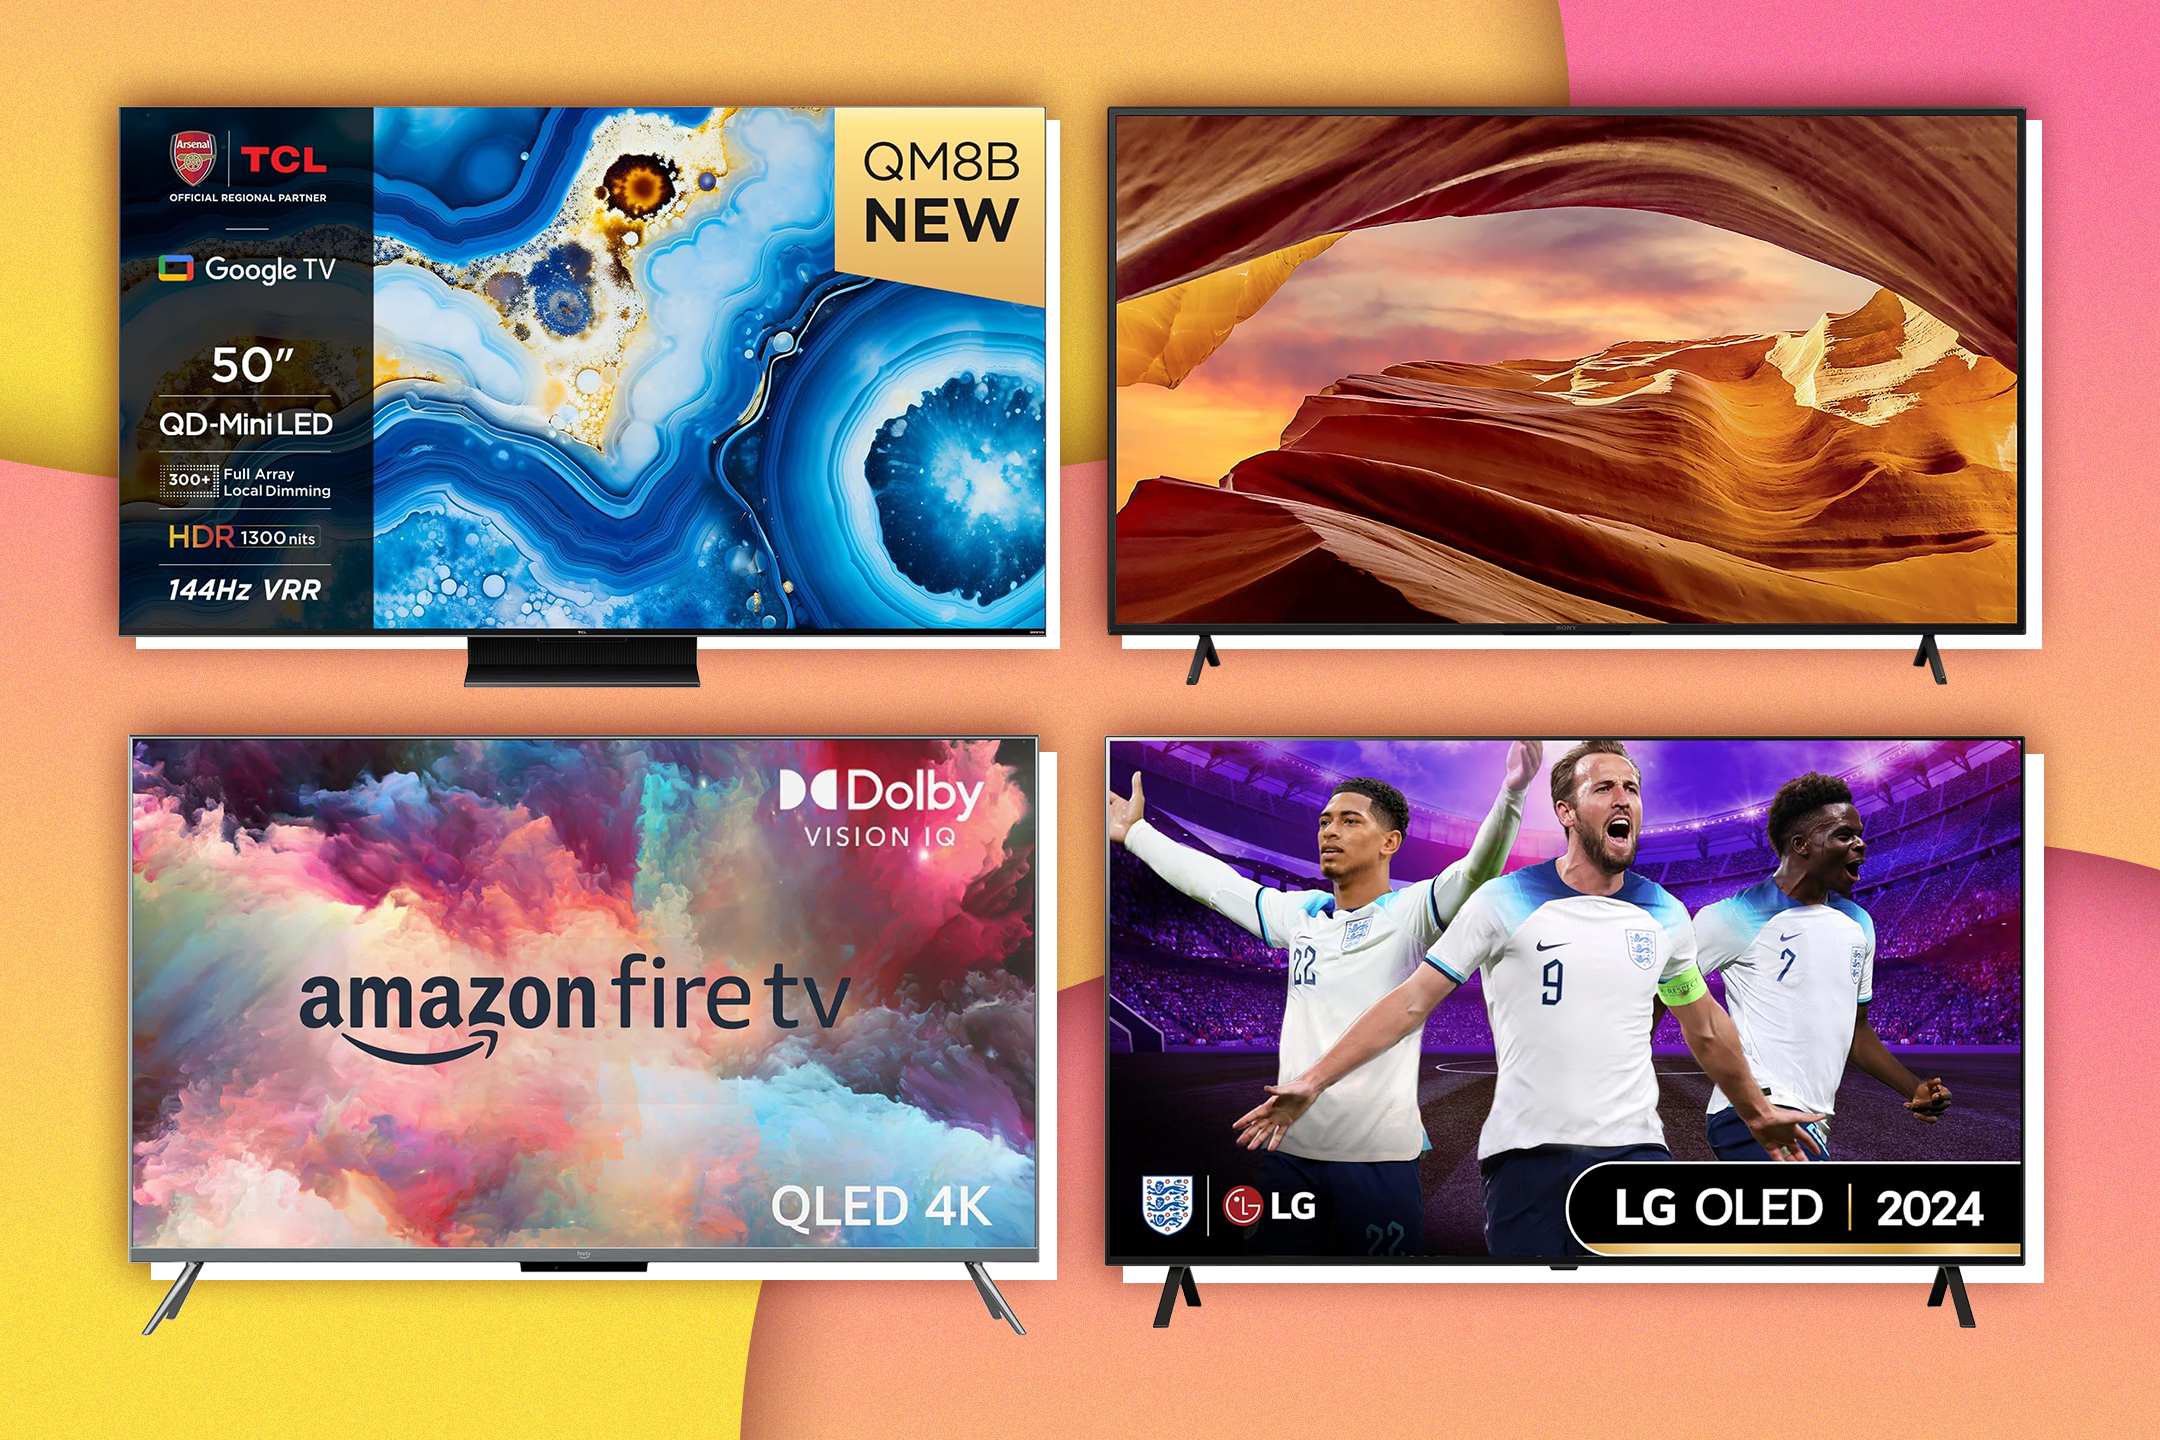 Last year’s Prime Day saw the price of the 50in Amazon Fire TV drop to just ?149 – could it happen again?